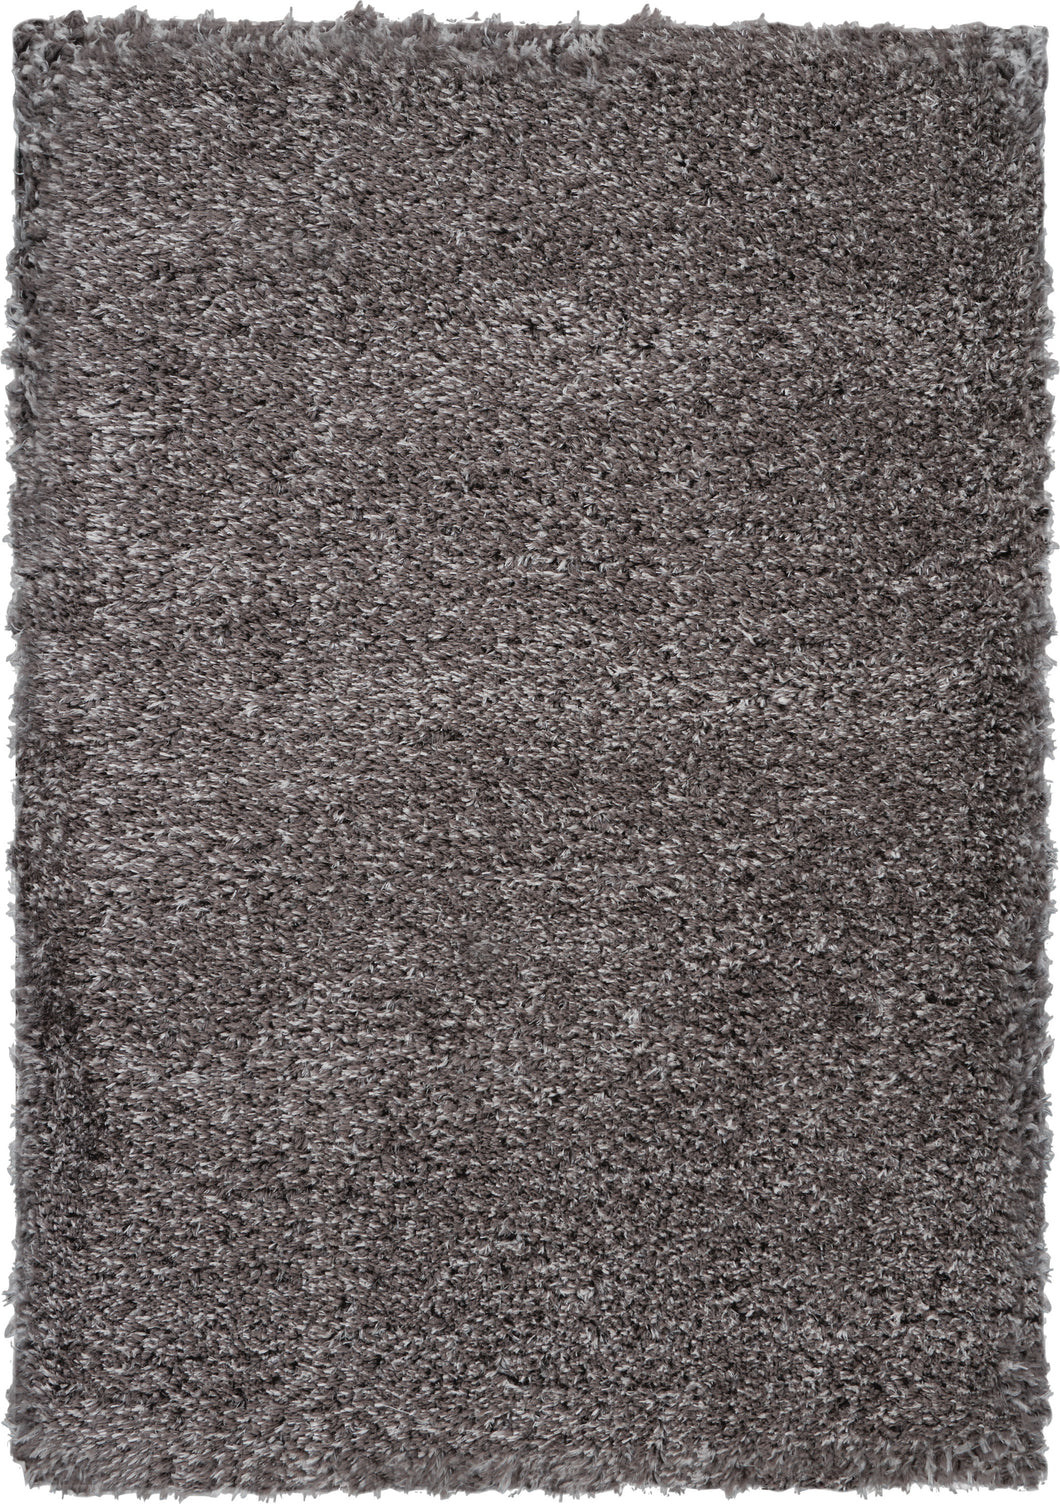 Nourison Luxe Shag LXS01 Charcoal Grey 8'x10' Large Rug LXS01 Charcoal